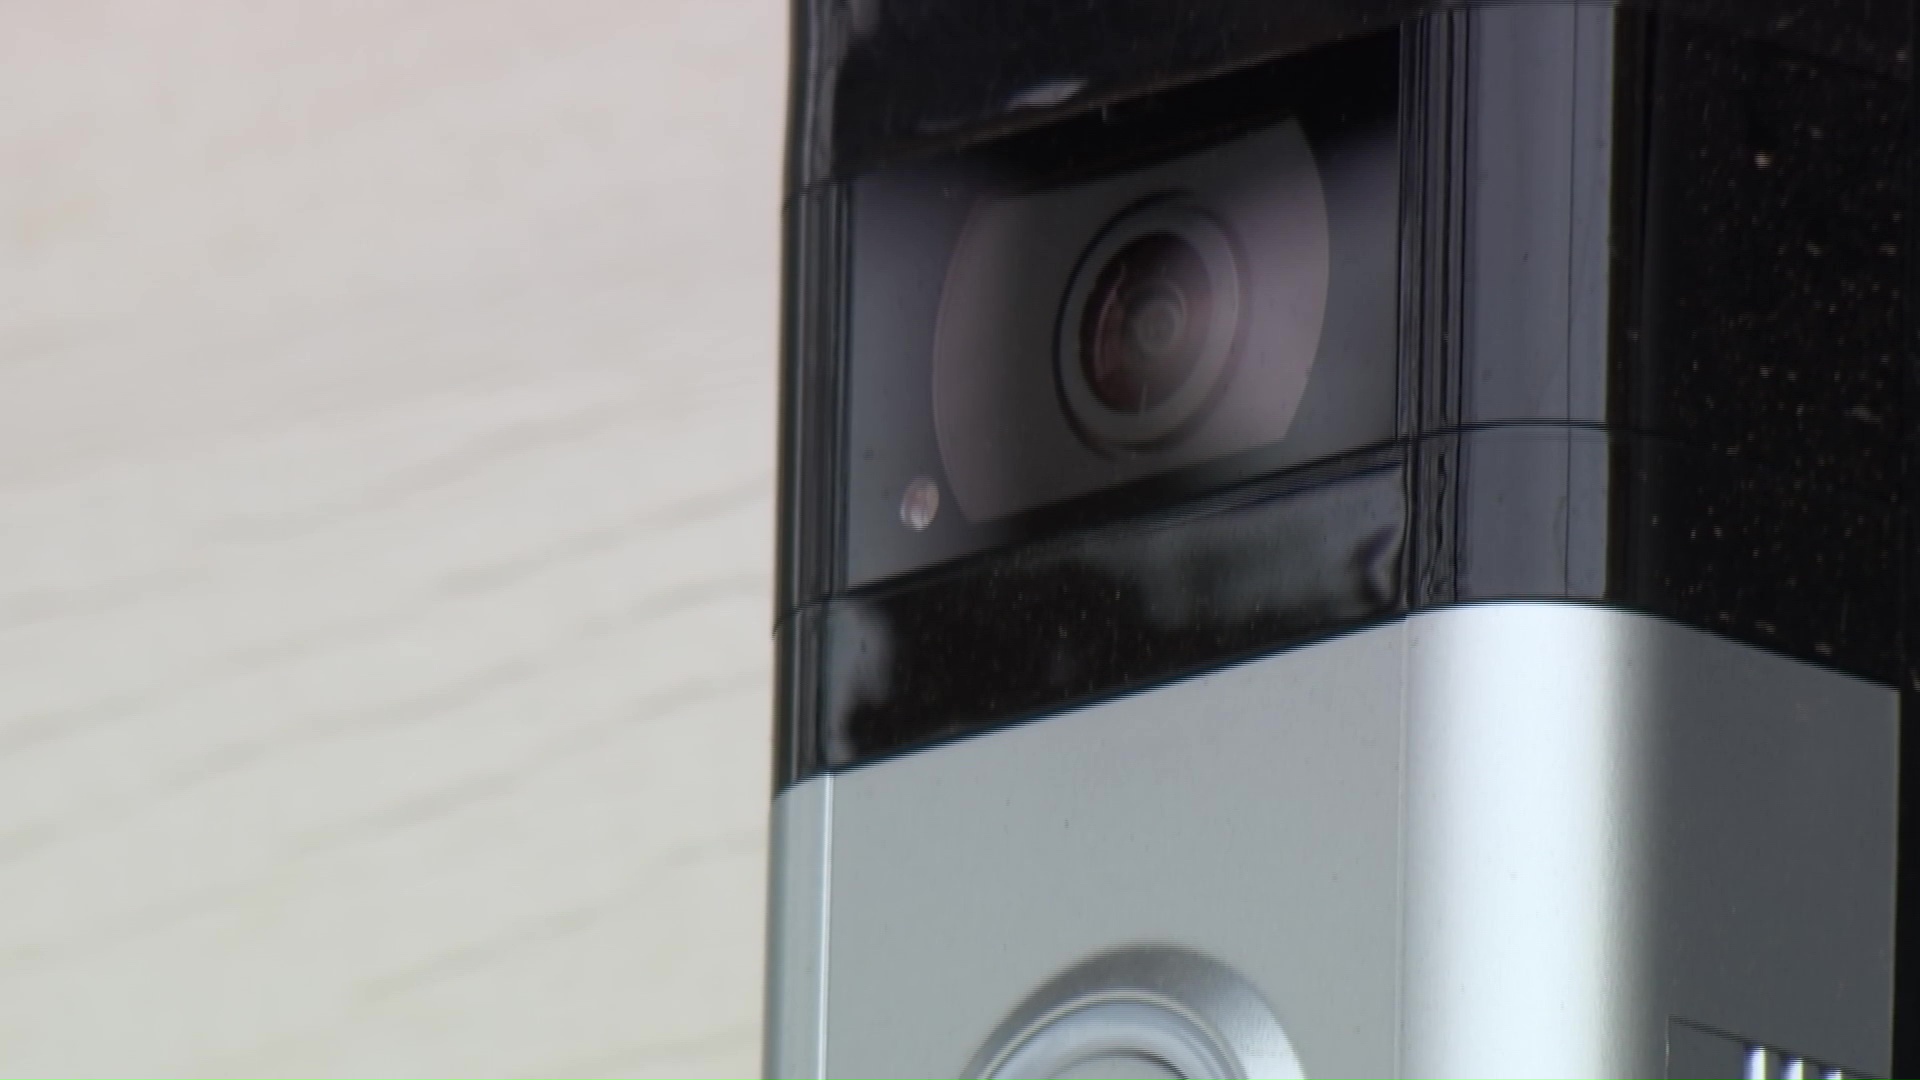 Ring doorbell selling users data to Police and research firm. : r/privacy